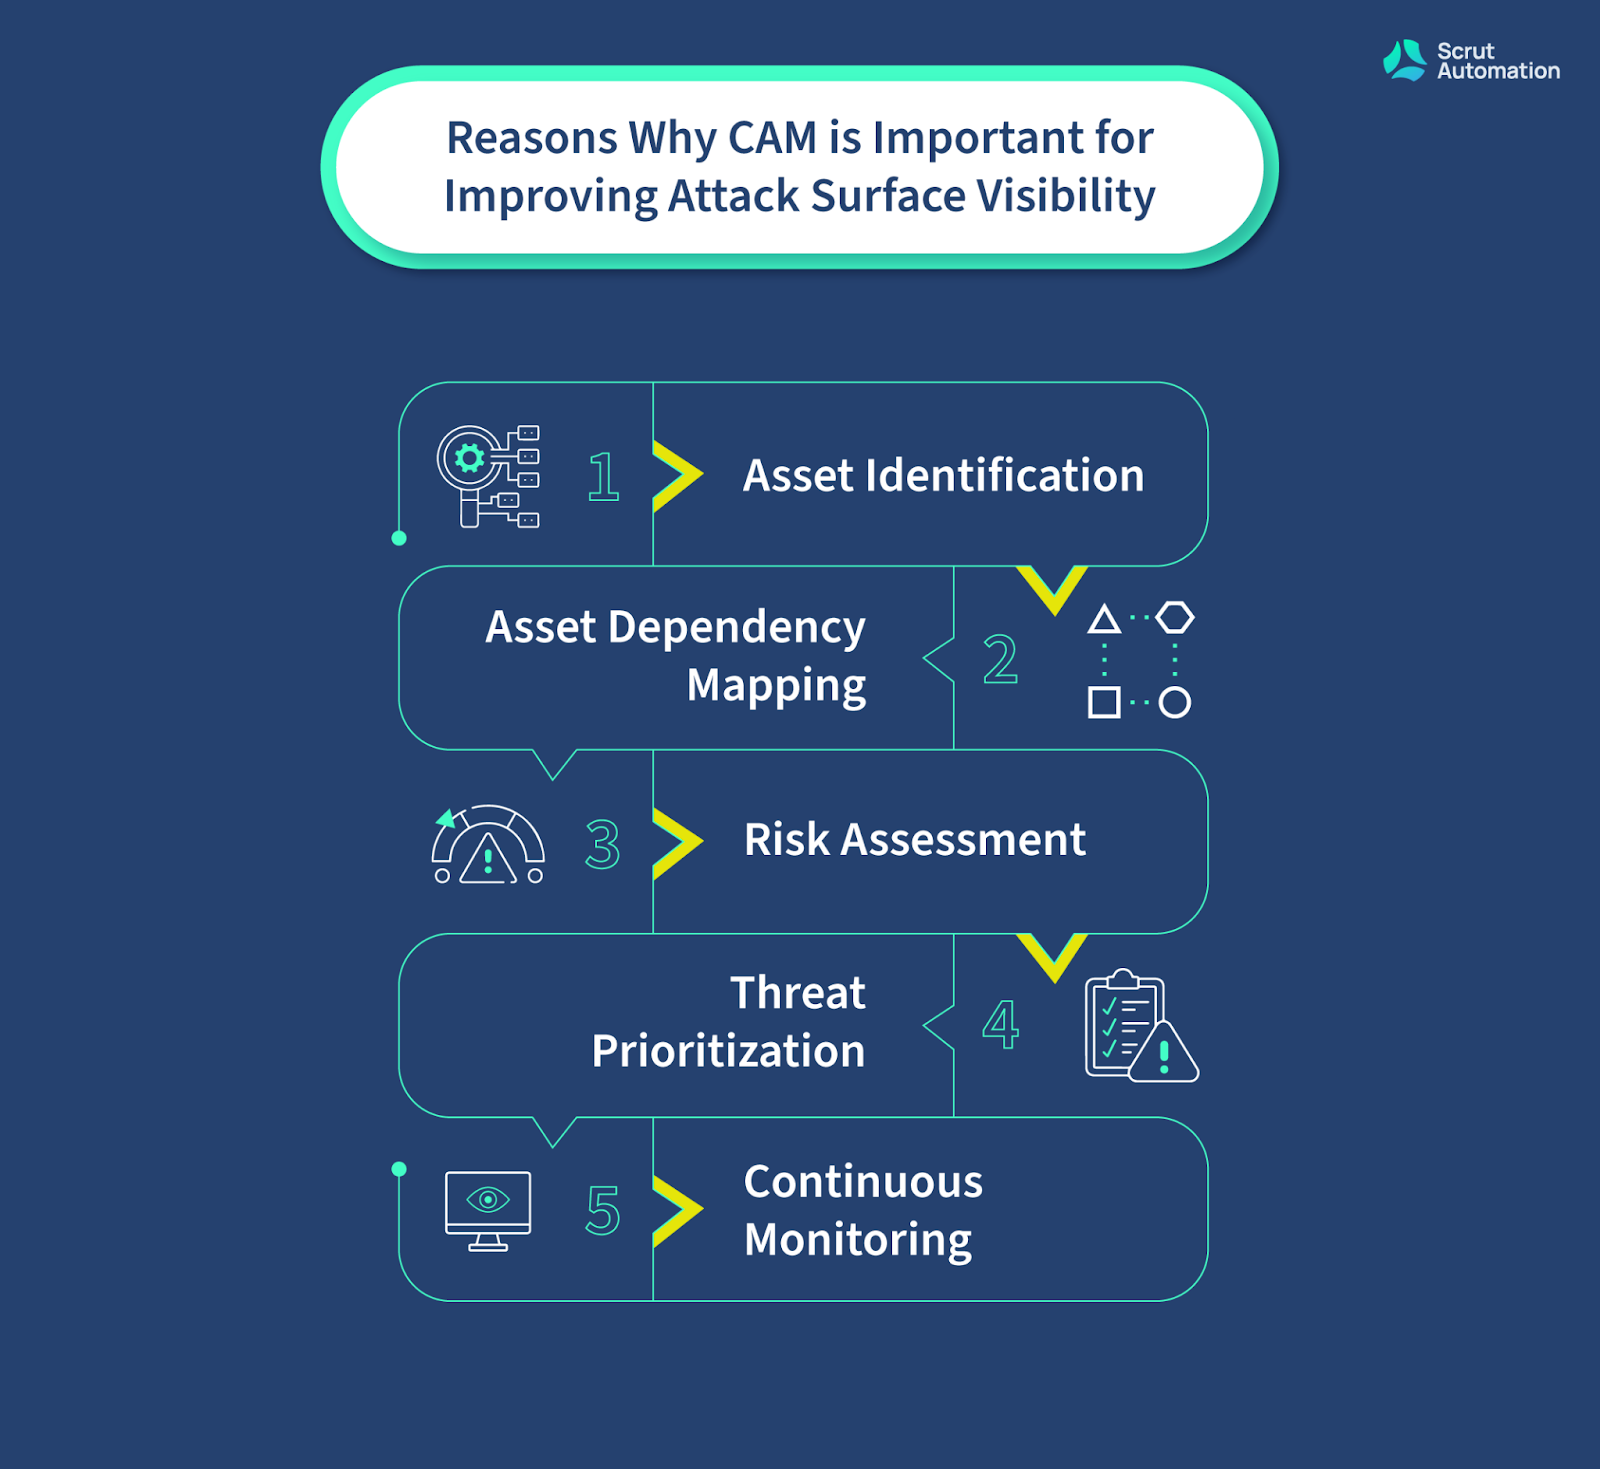 CAM helps in identifying, inventorying, and classifying cyber assets to remediate all vulnerabilities before hand.